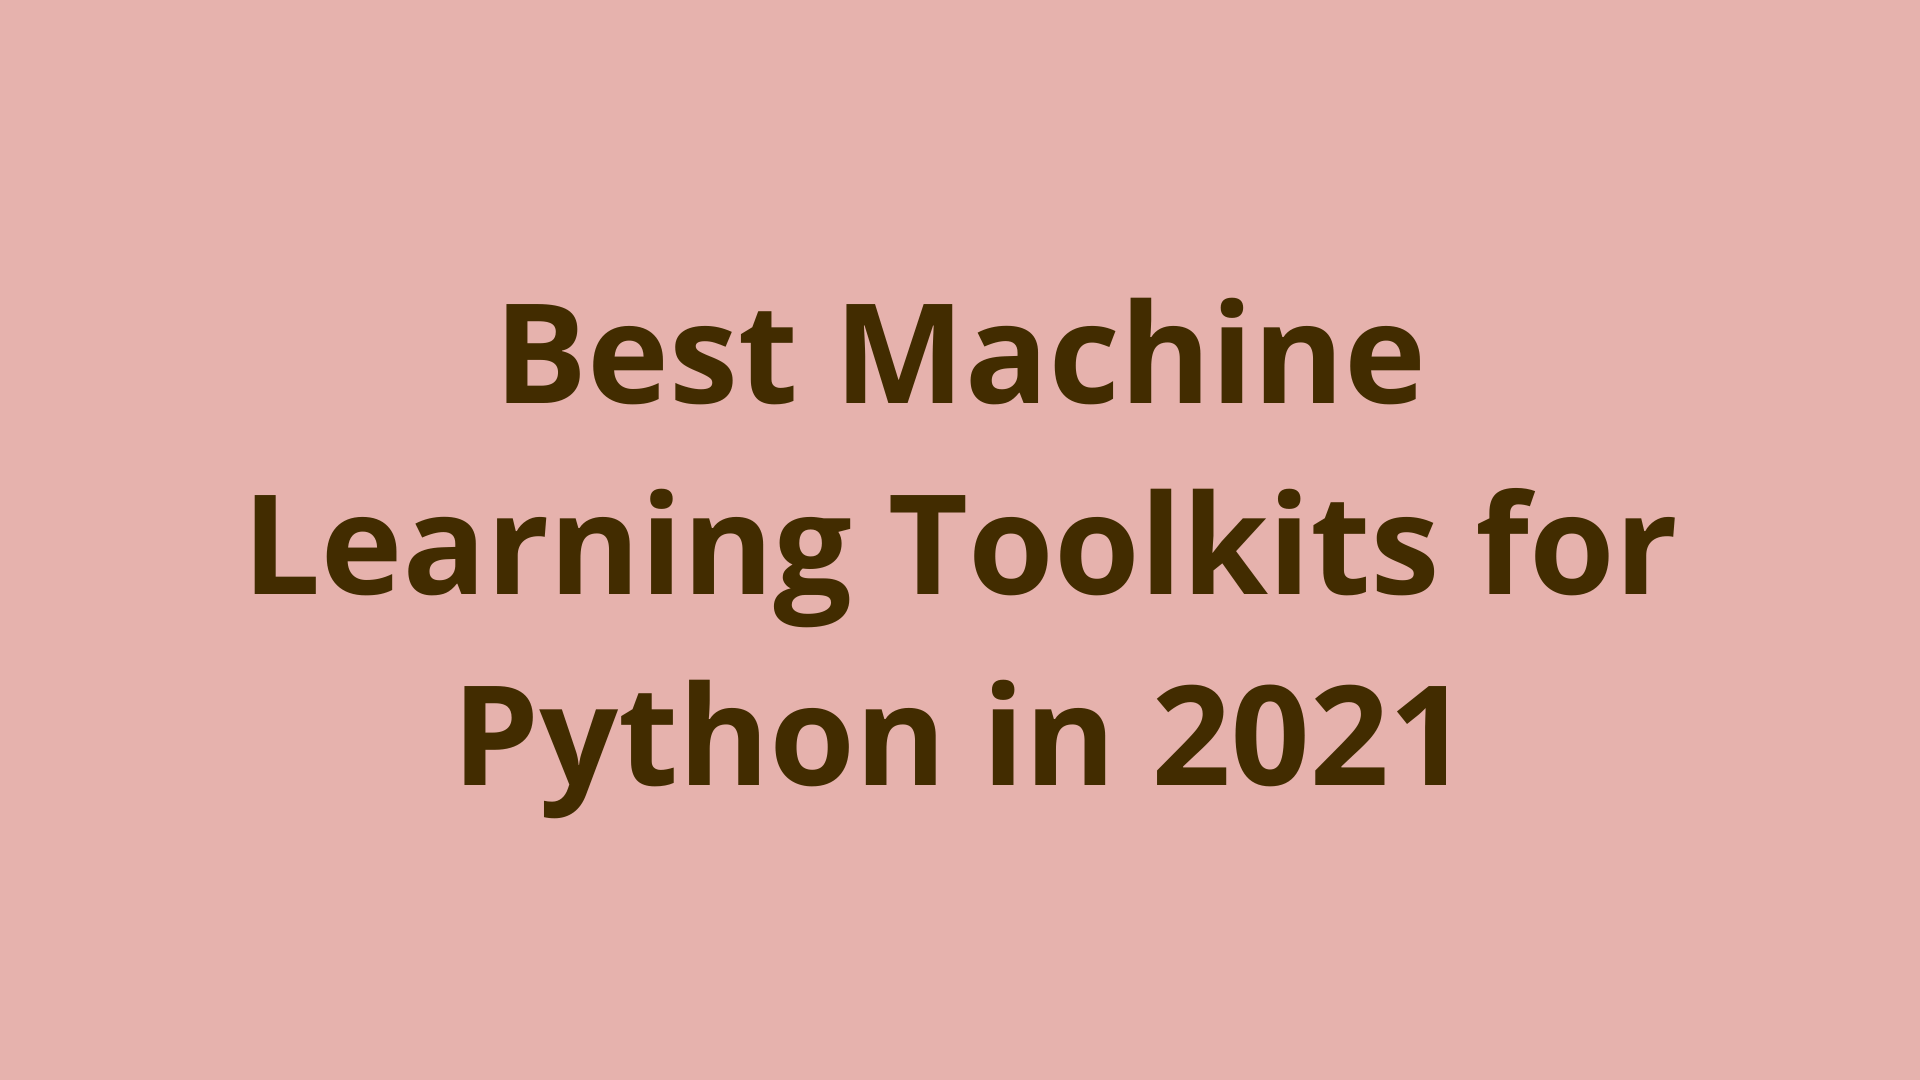 Image of Best Machine Learning Toolkits for Python in 2021